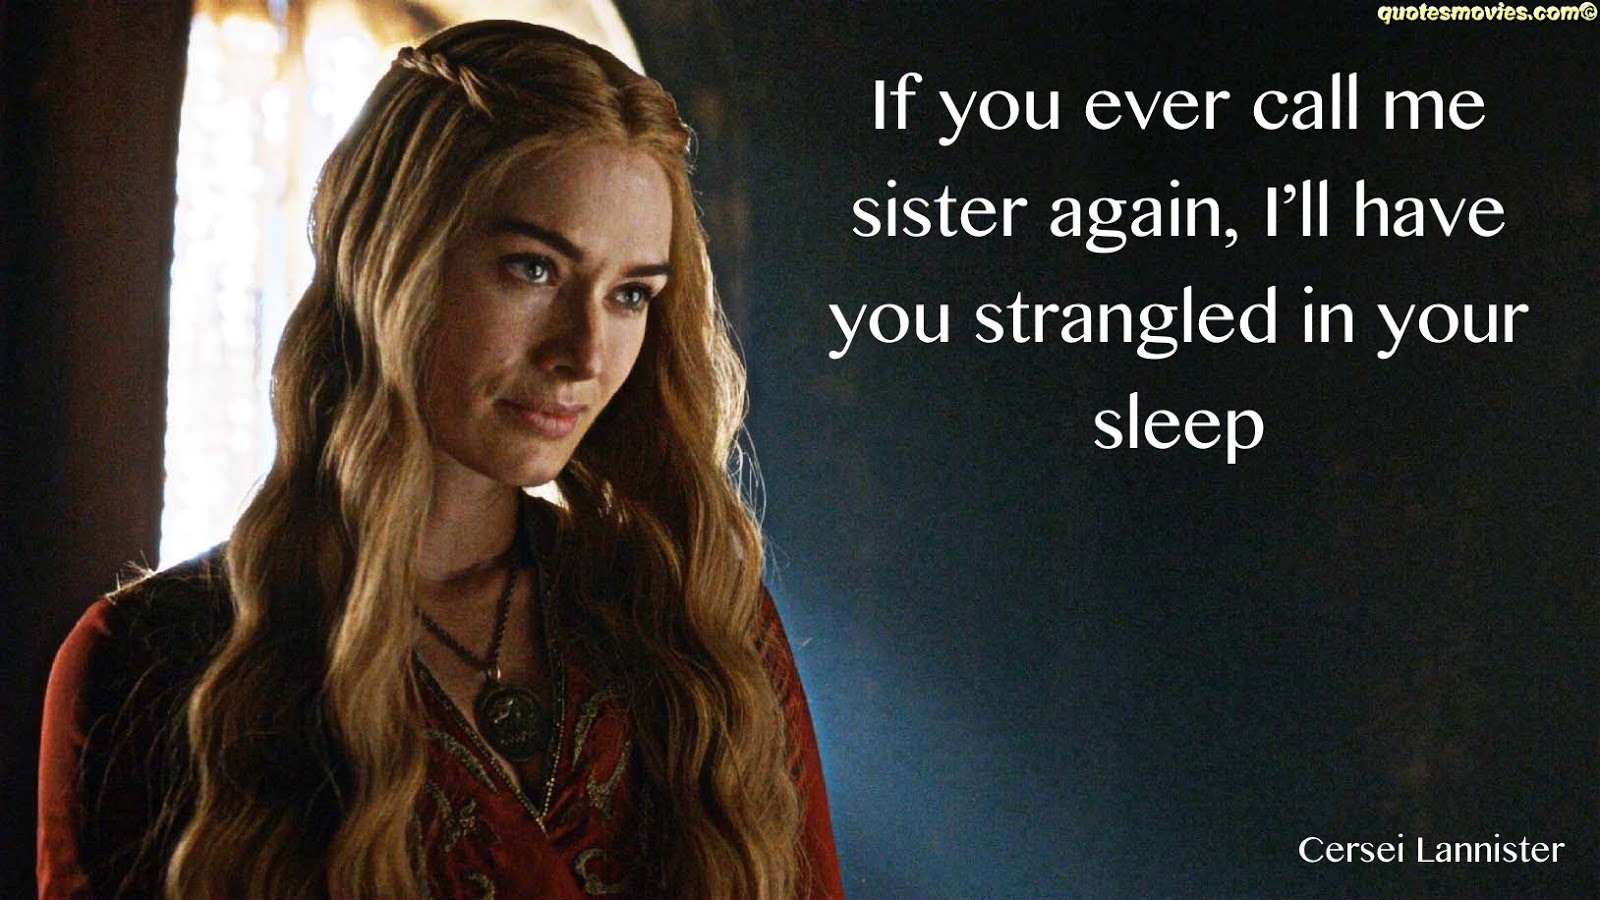 Top Game Of Thrones Quotes And Memorable Sayings All Season Quotes